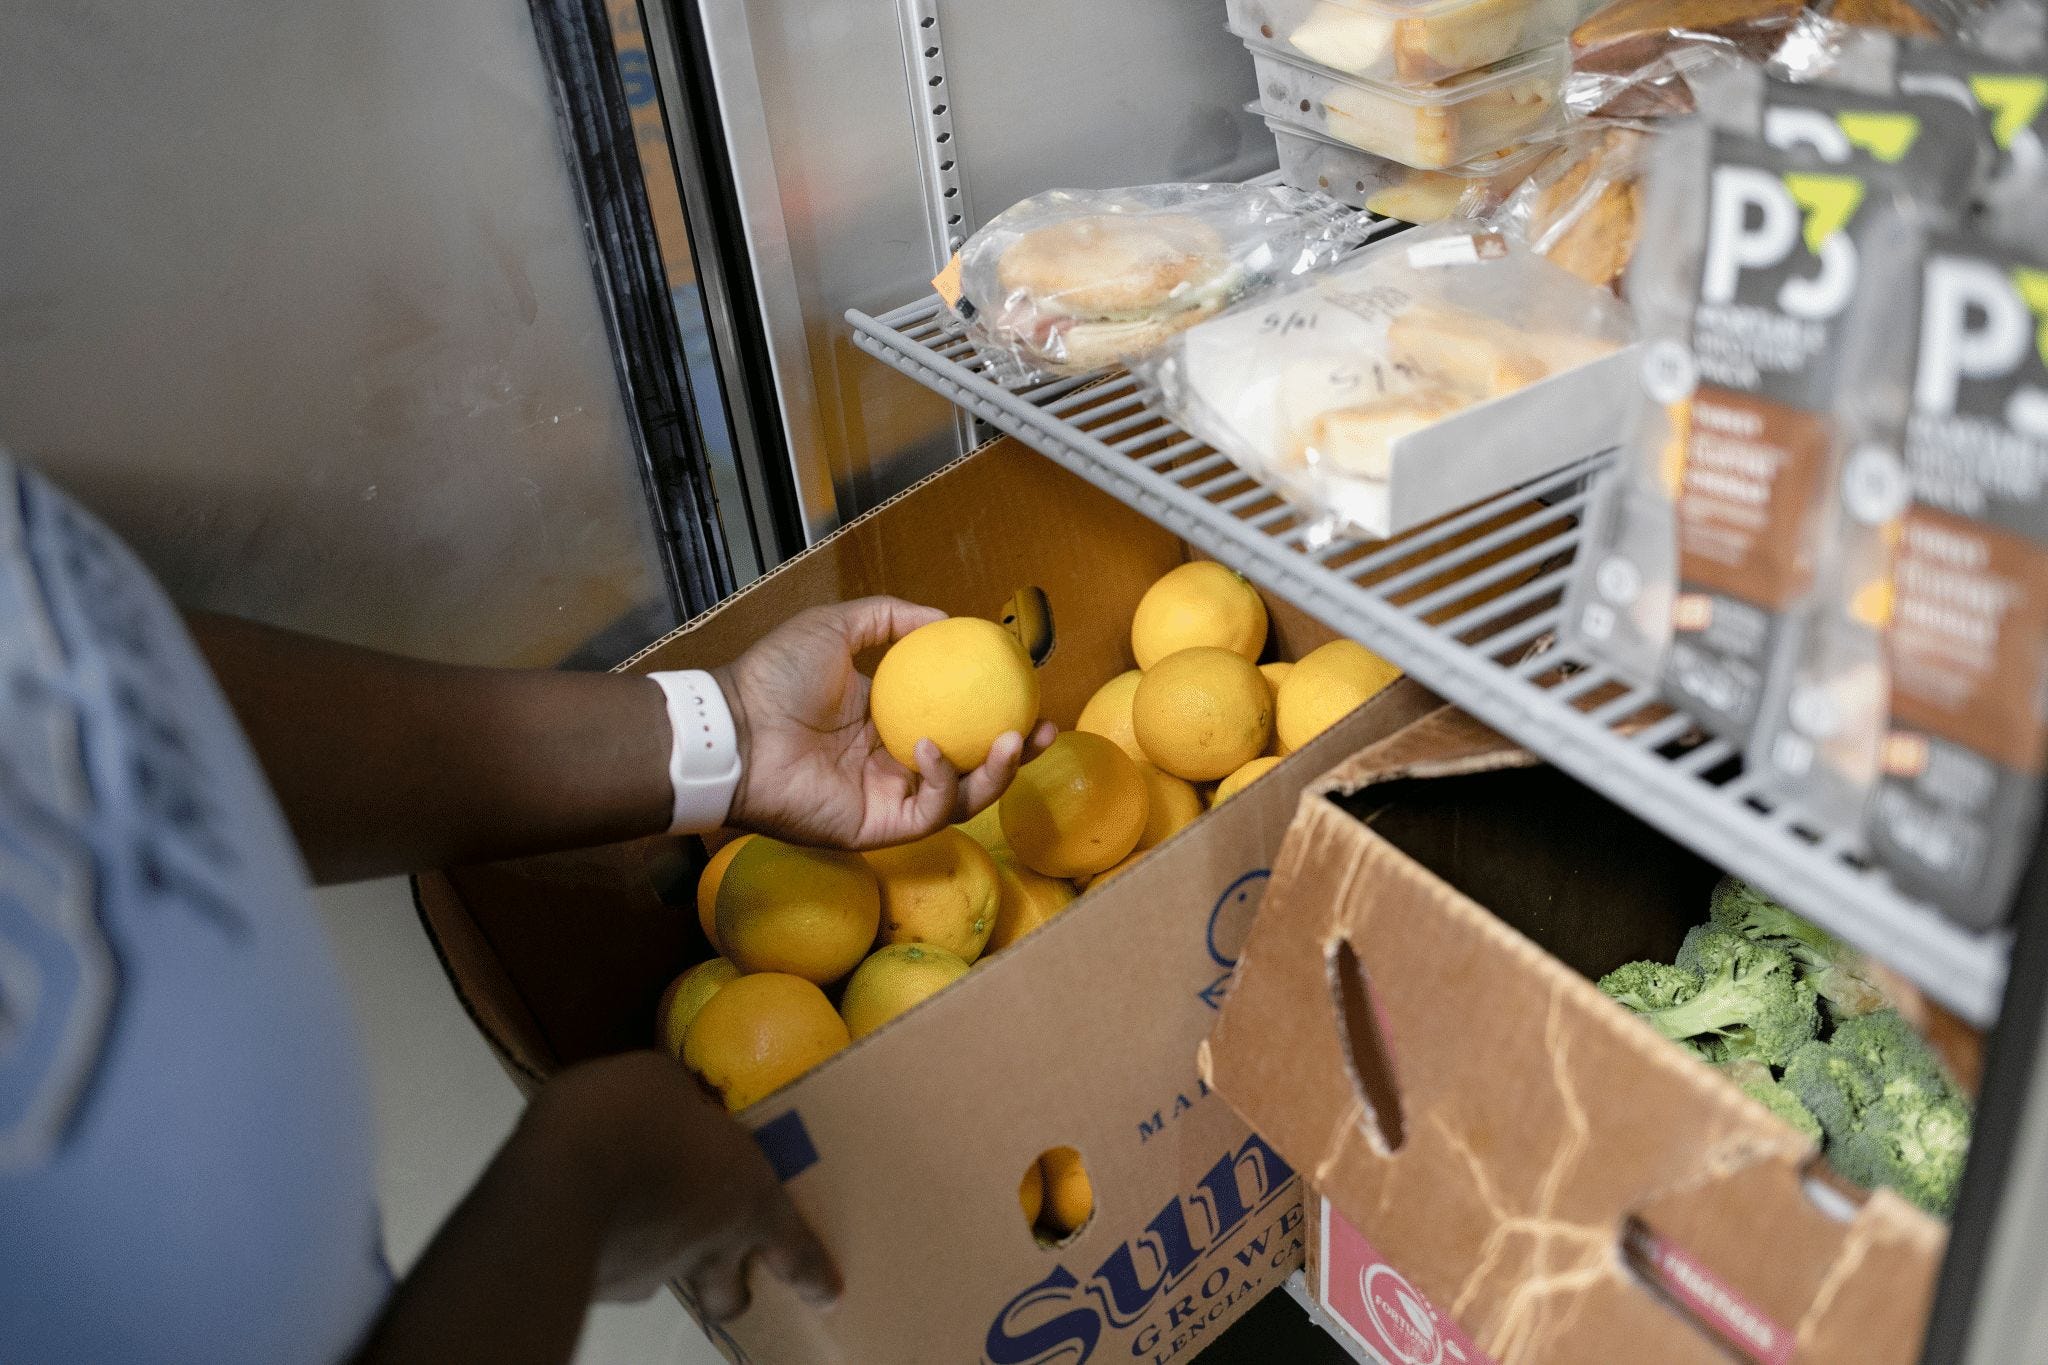 Republican-led states are blocking summer food benefits for hungry families